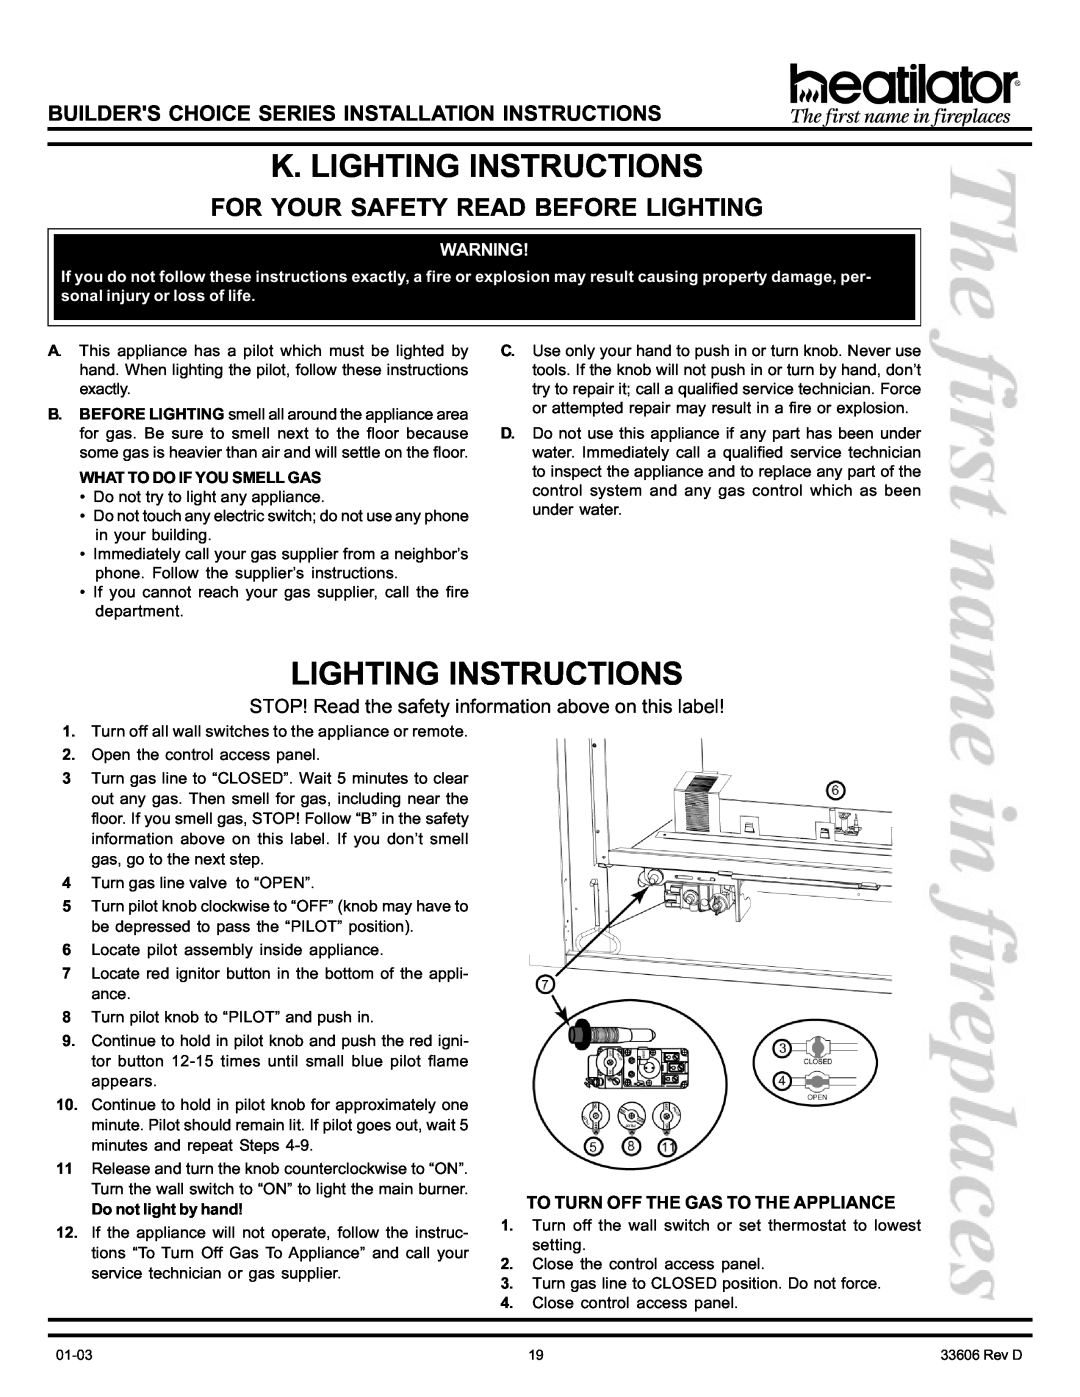 Heatiator BCDV36 K. Lighting Instructions, For Your Safety Read Before Lighting, To Turn Off The Gas To The Appliance 